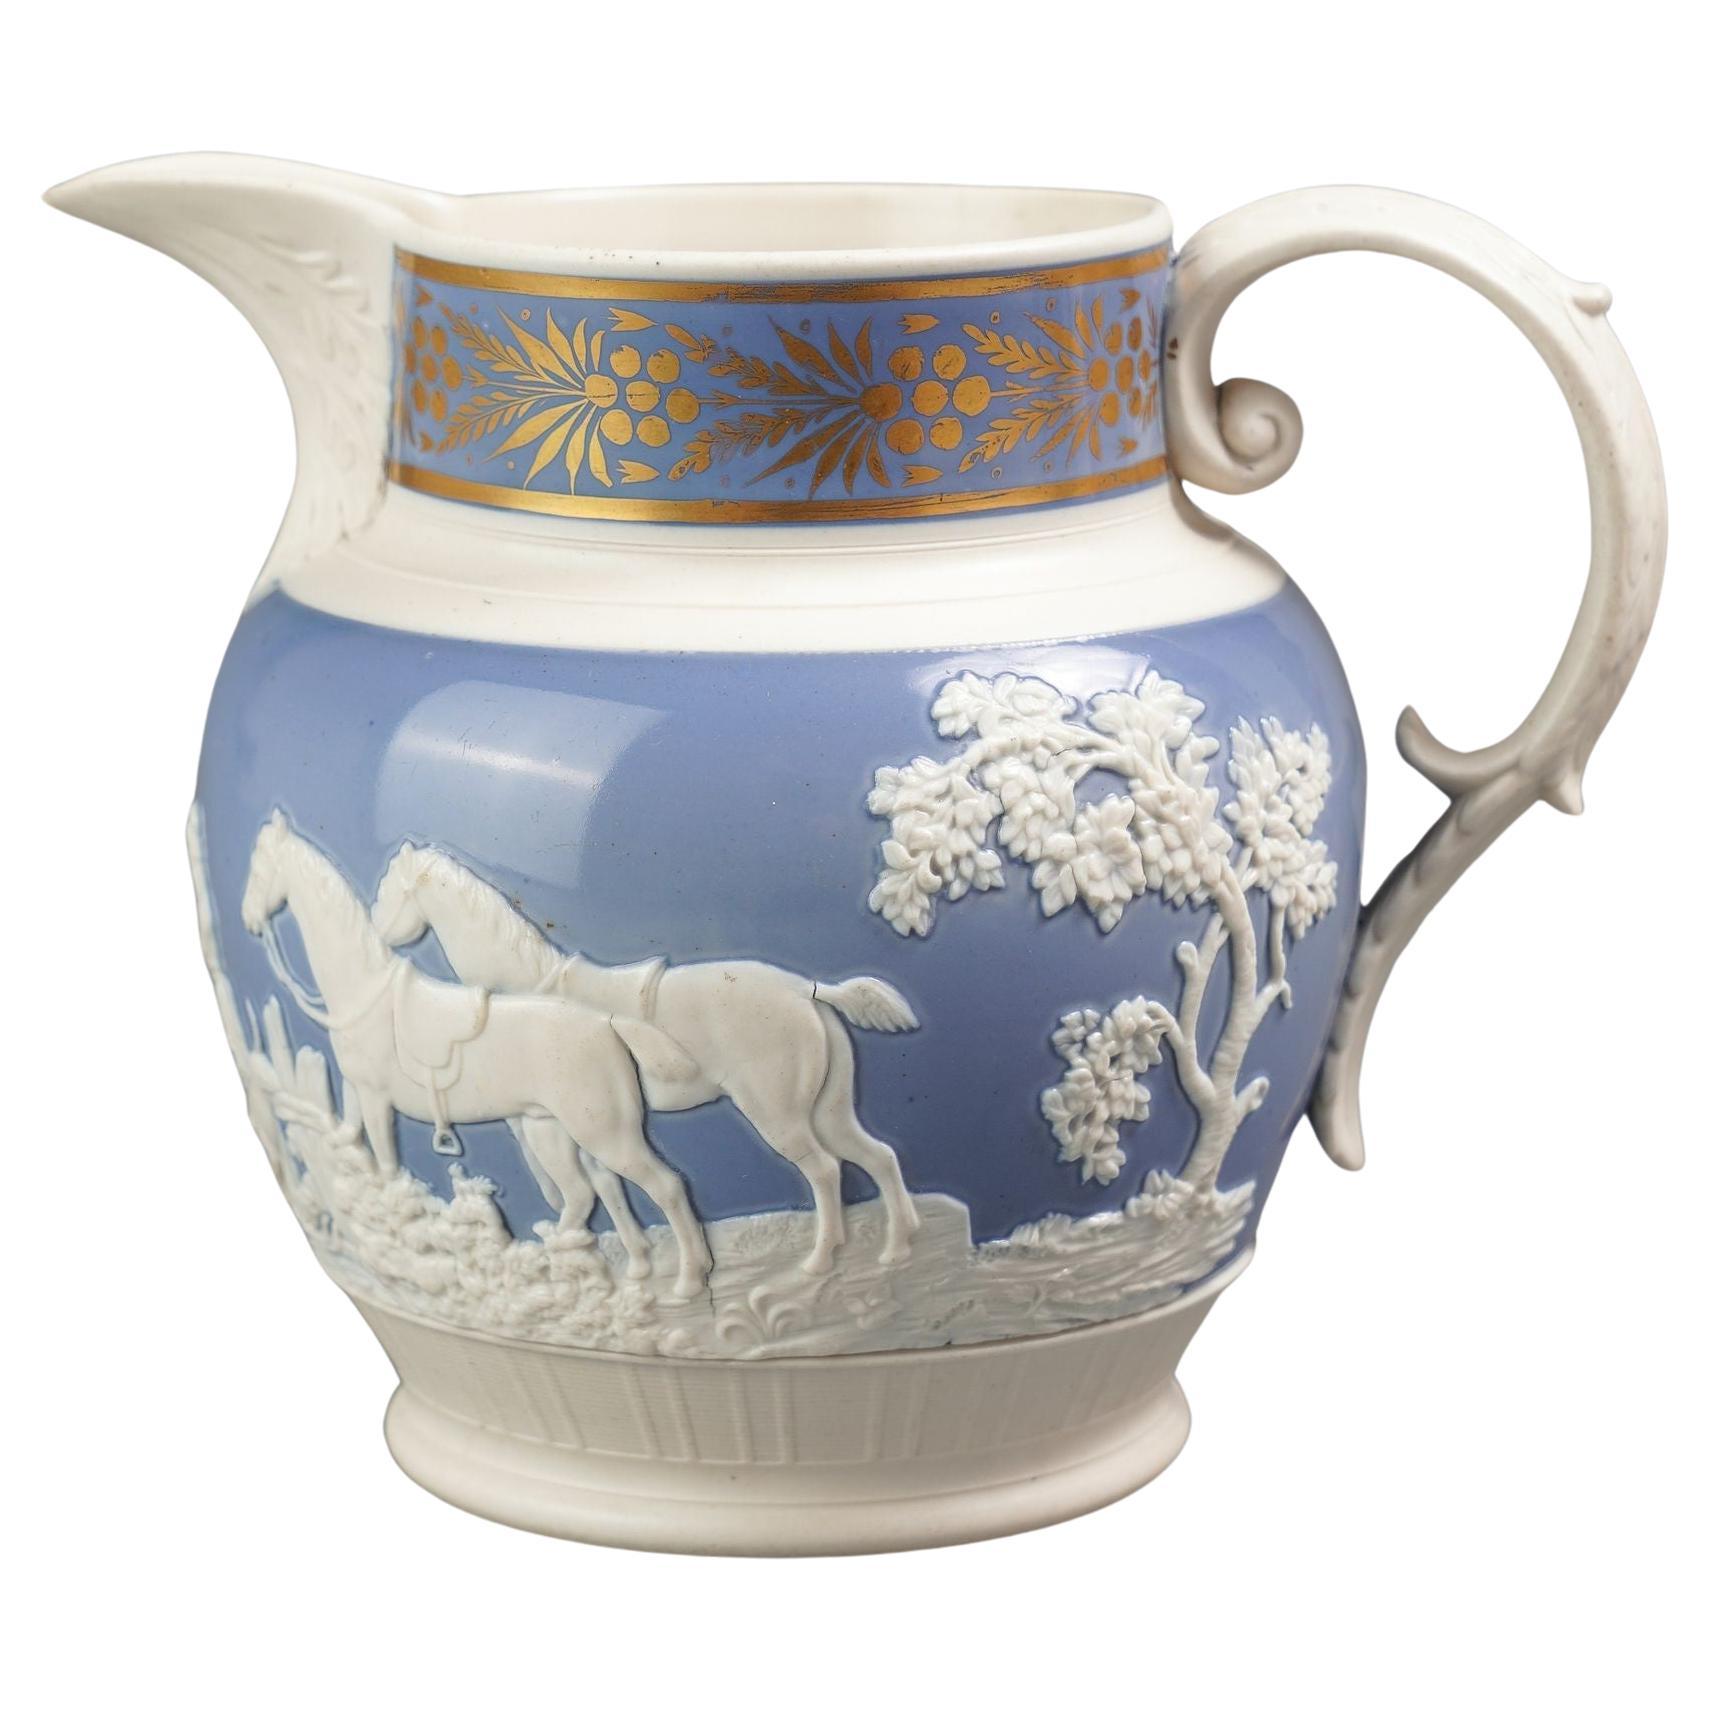 English stoneware hunt jug by Chetham & Woolley, c. 1793-1821 For Sale